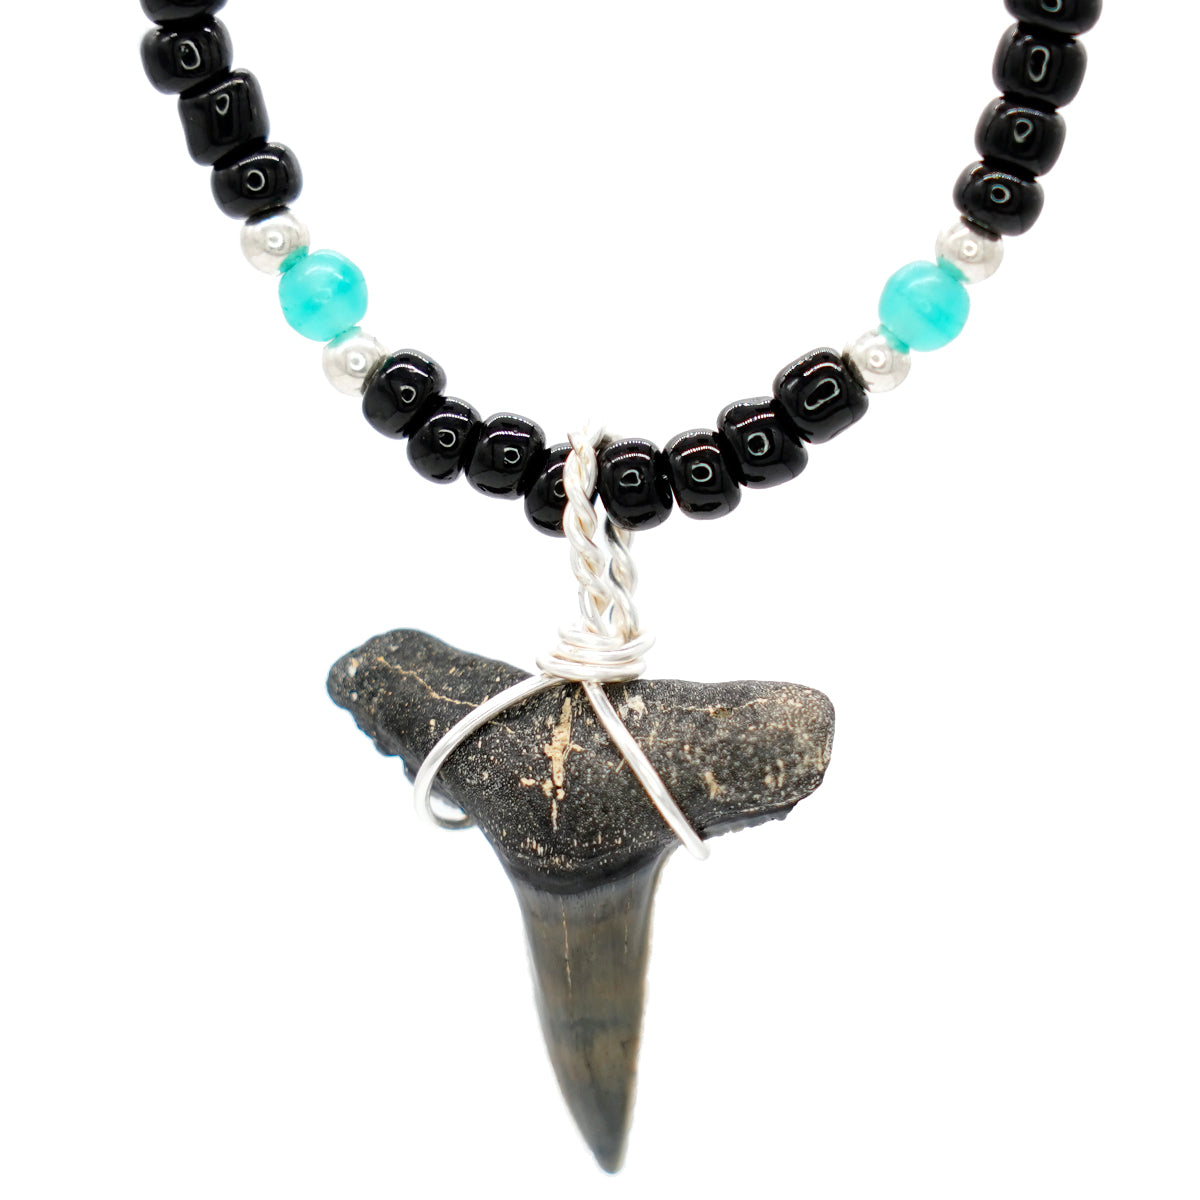 Fossilized Lemon Shark Tooth on Black & Blue Glass Bead Necklace